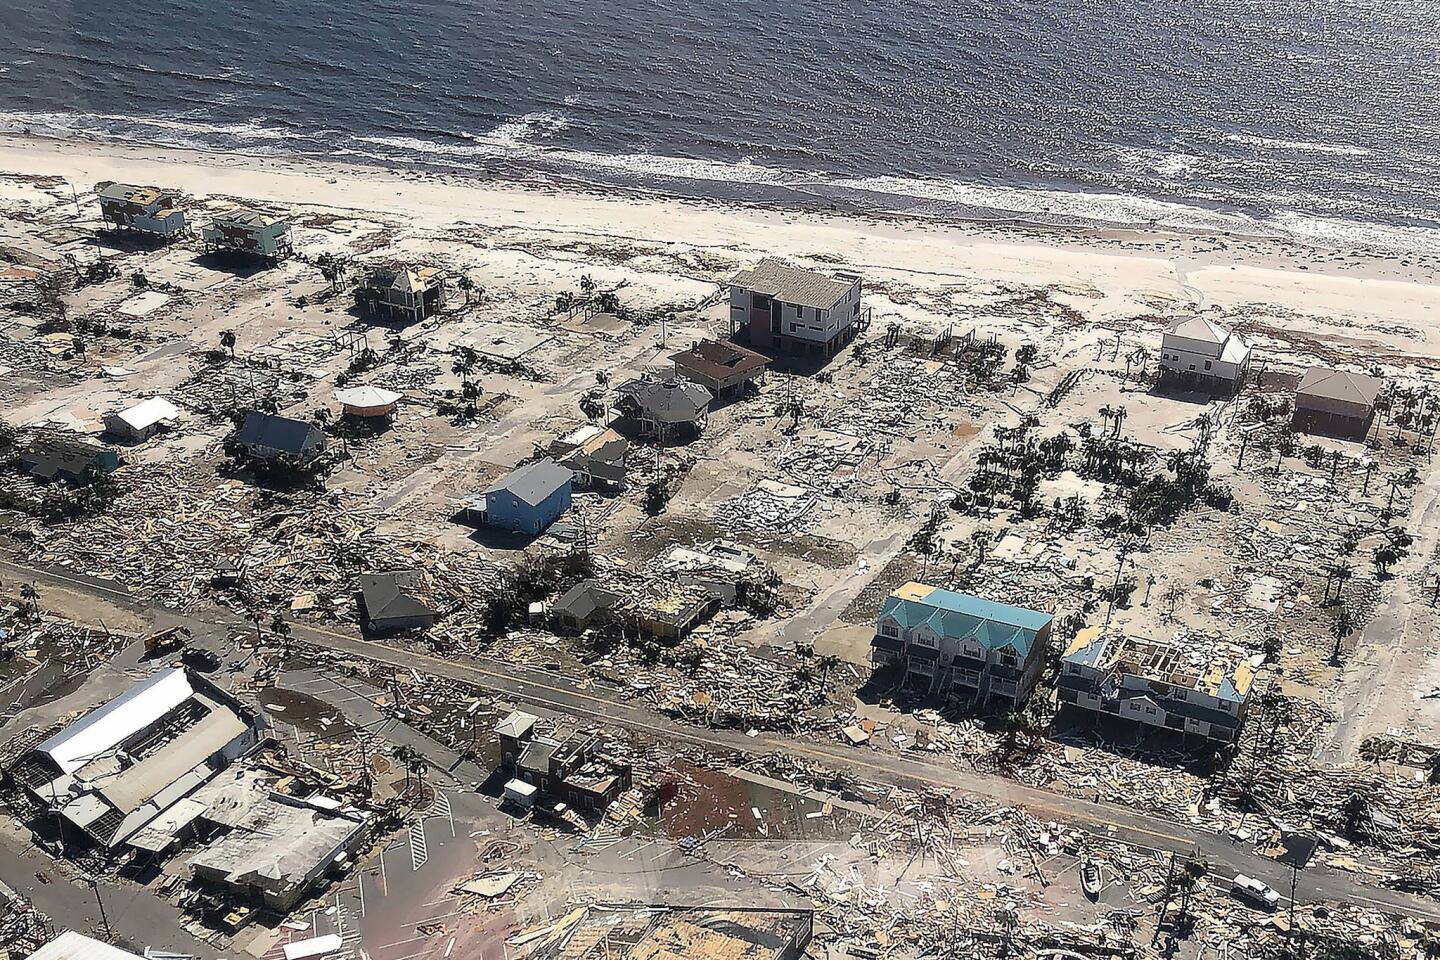 Port St. Joe after Hurricane Michael: Picking up the pieces